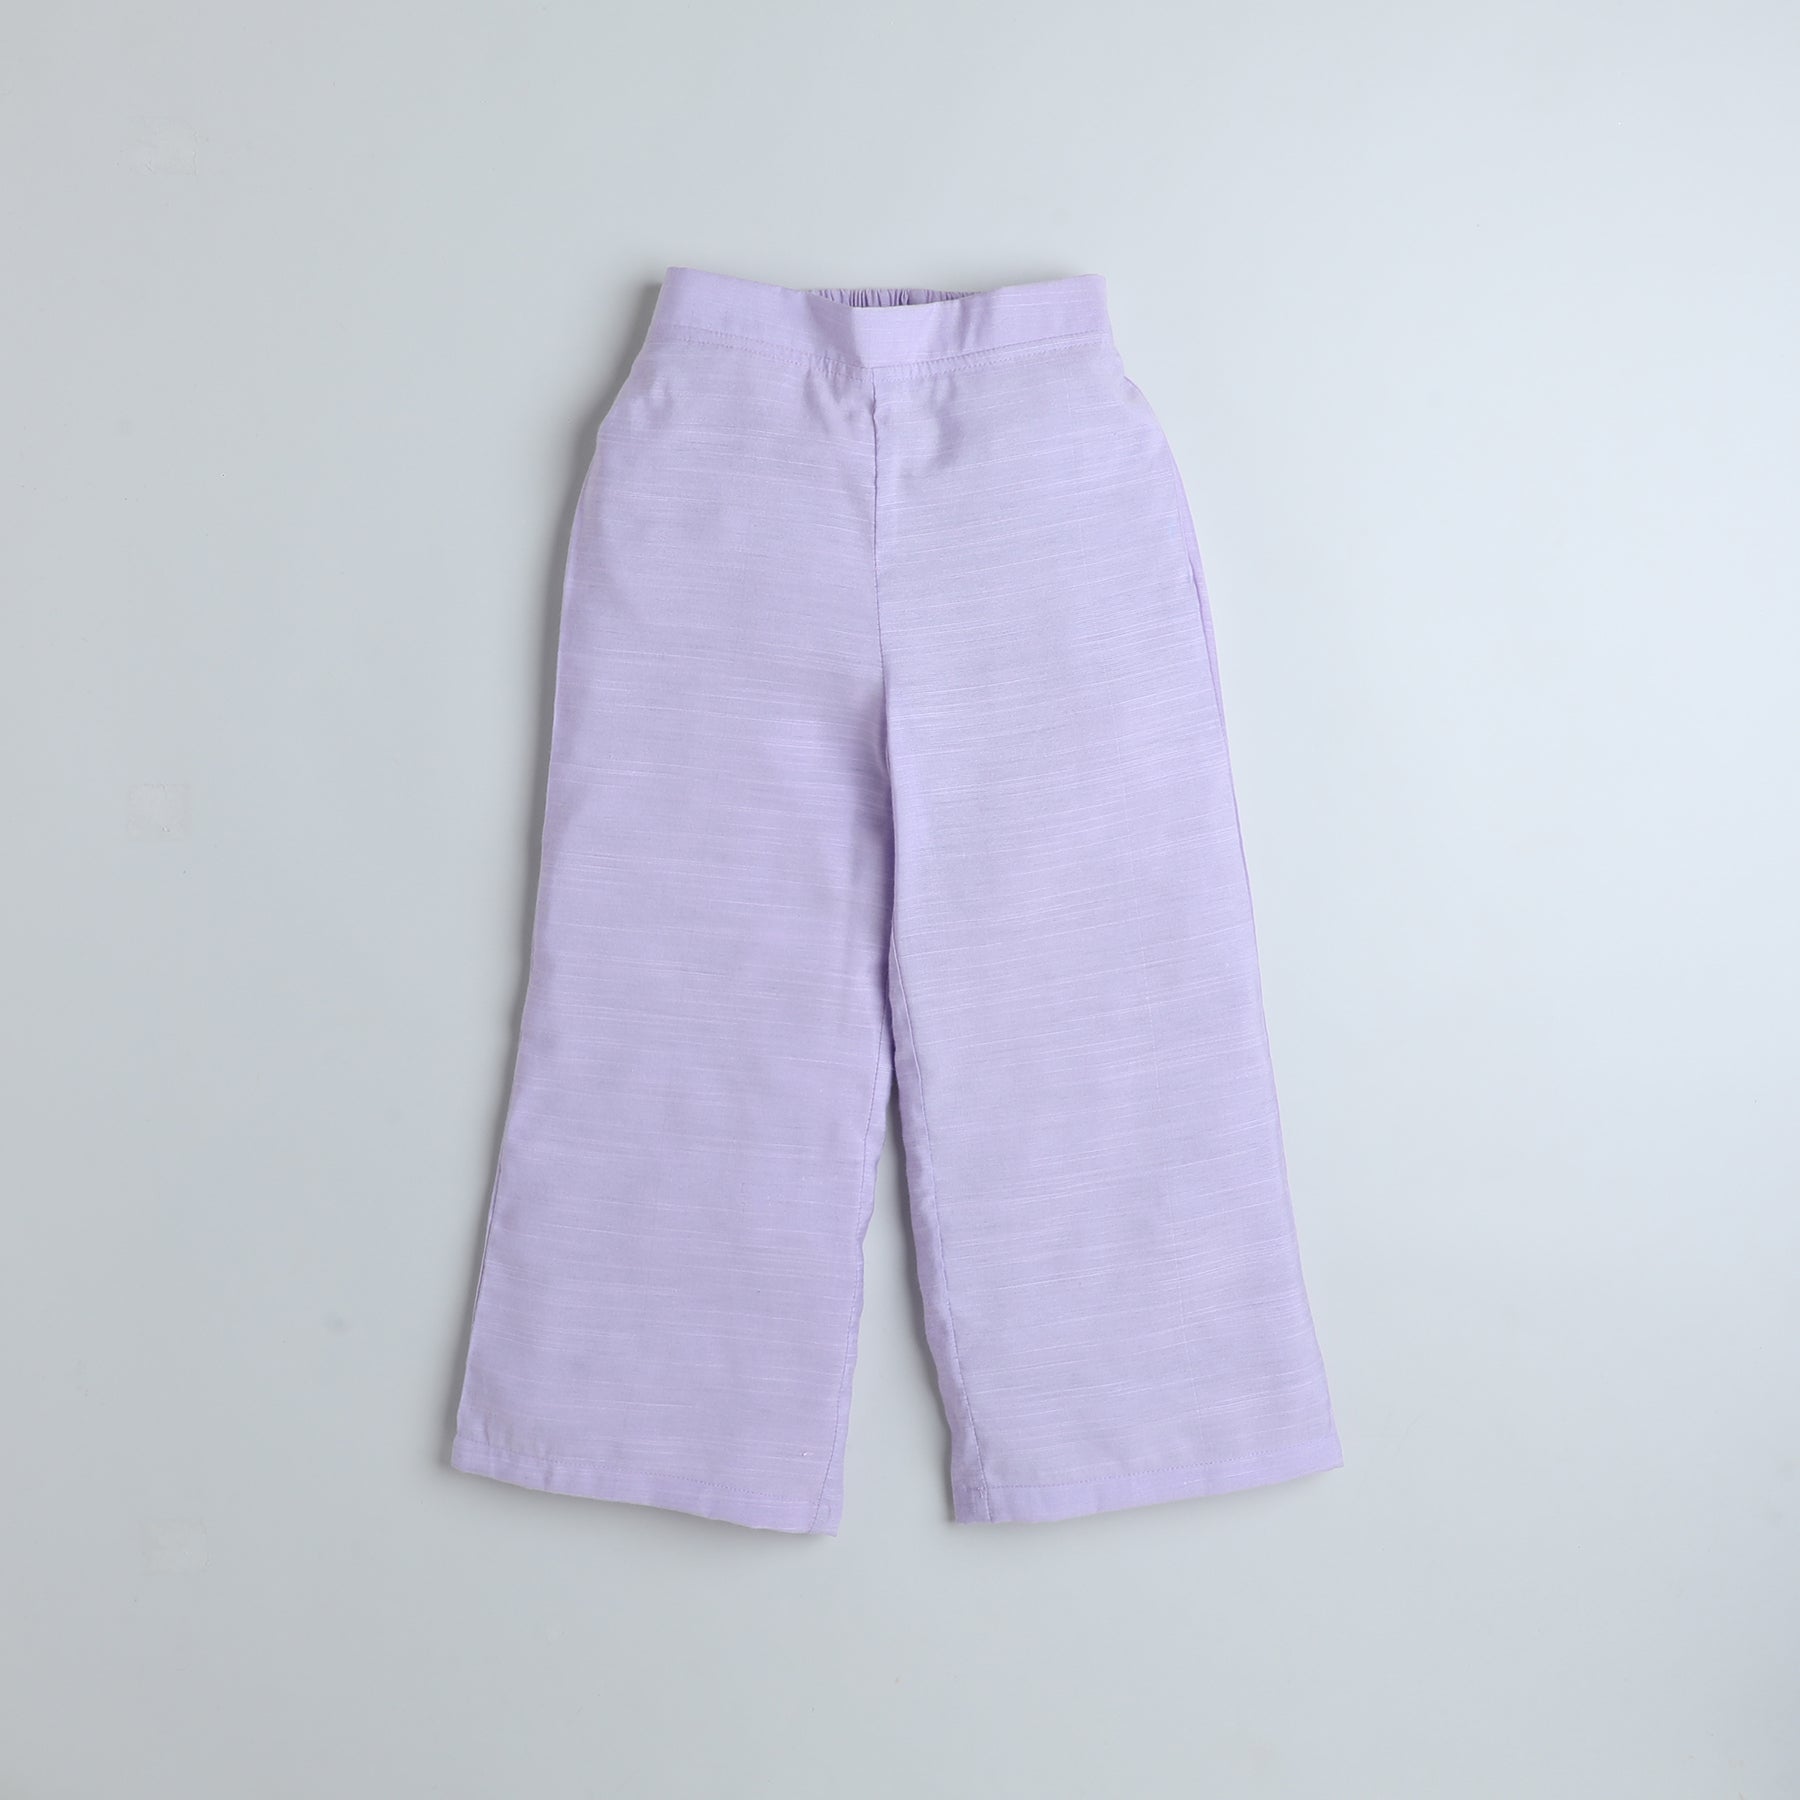 Dobby weaved sleeveless waist tie-up crop blazer and matching solid straight fit pant co-ord set- lavender